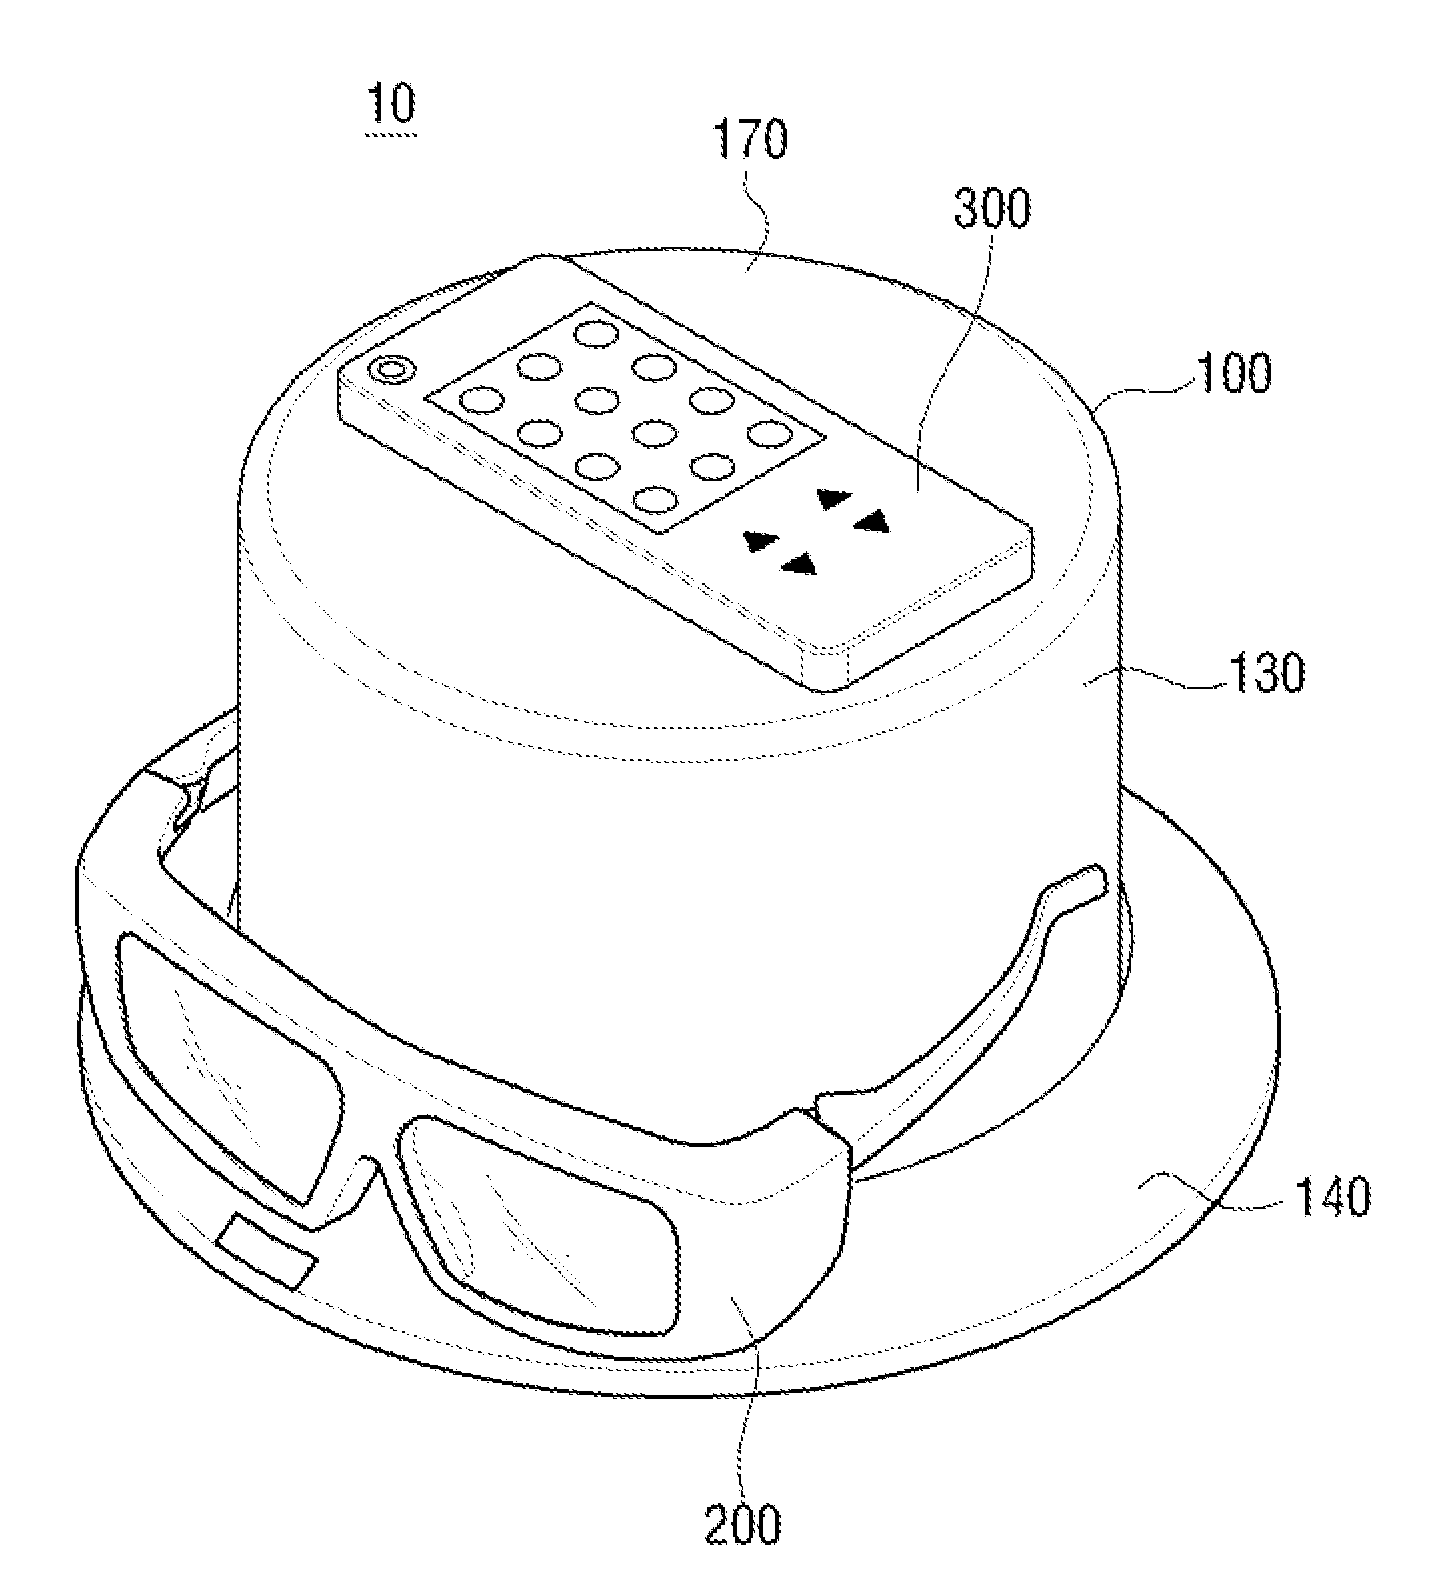 Wireless power transmission apparatus and system for wireless power transmission thereof